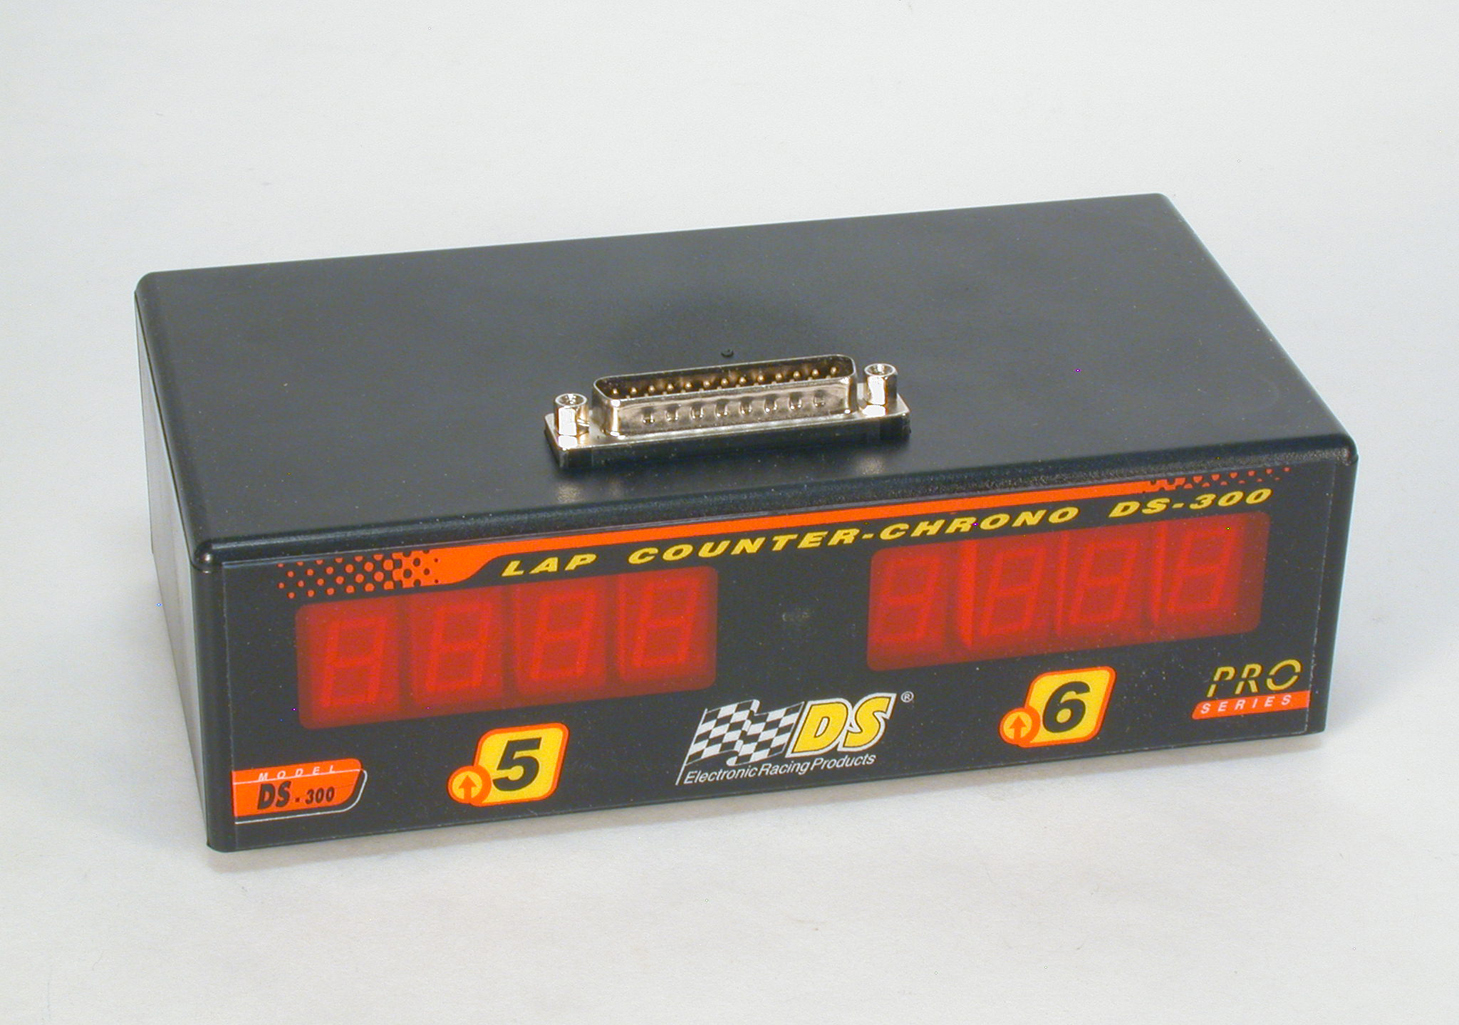 DS-356 Lap Counter Module for Lanes 5 and 6